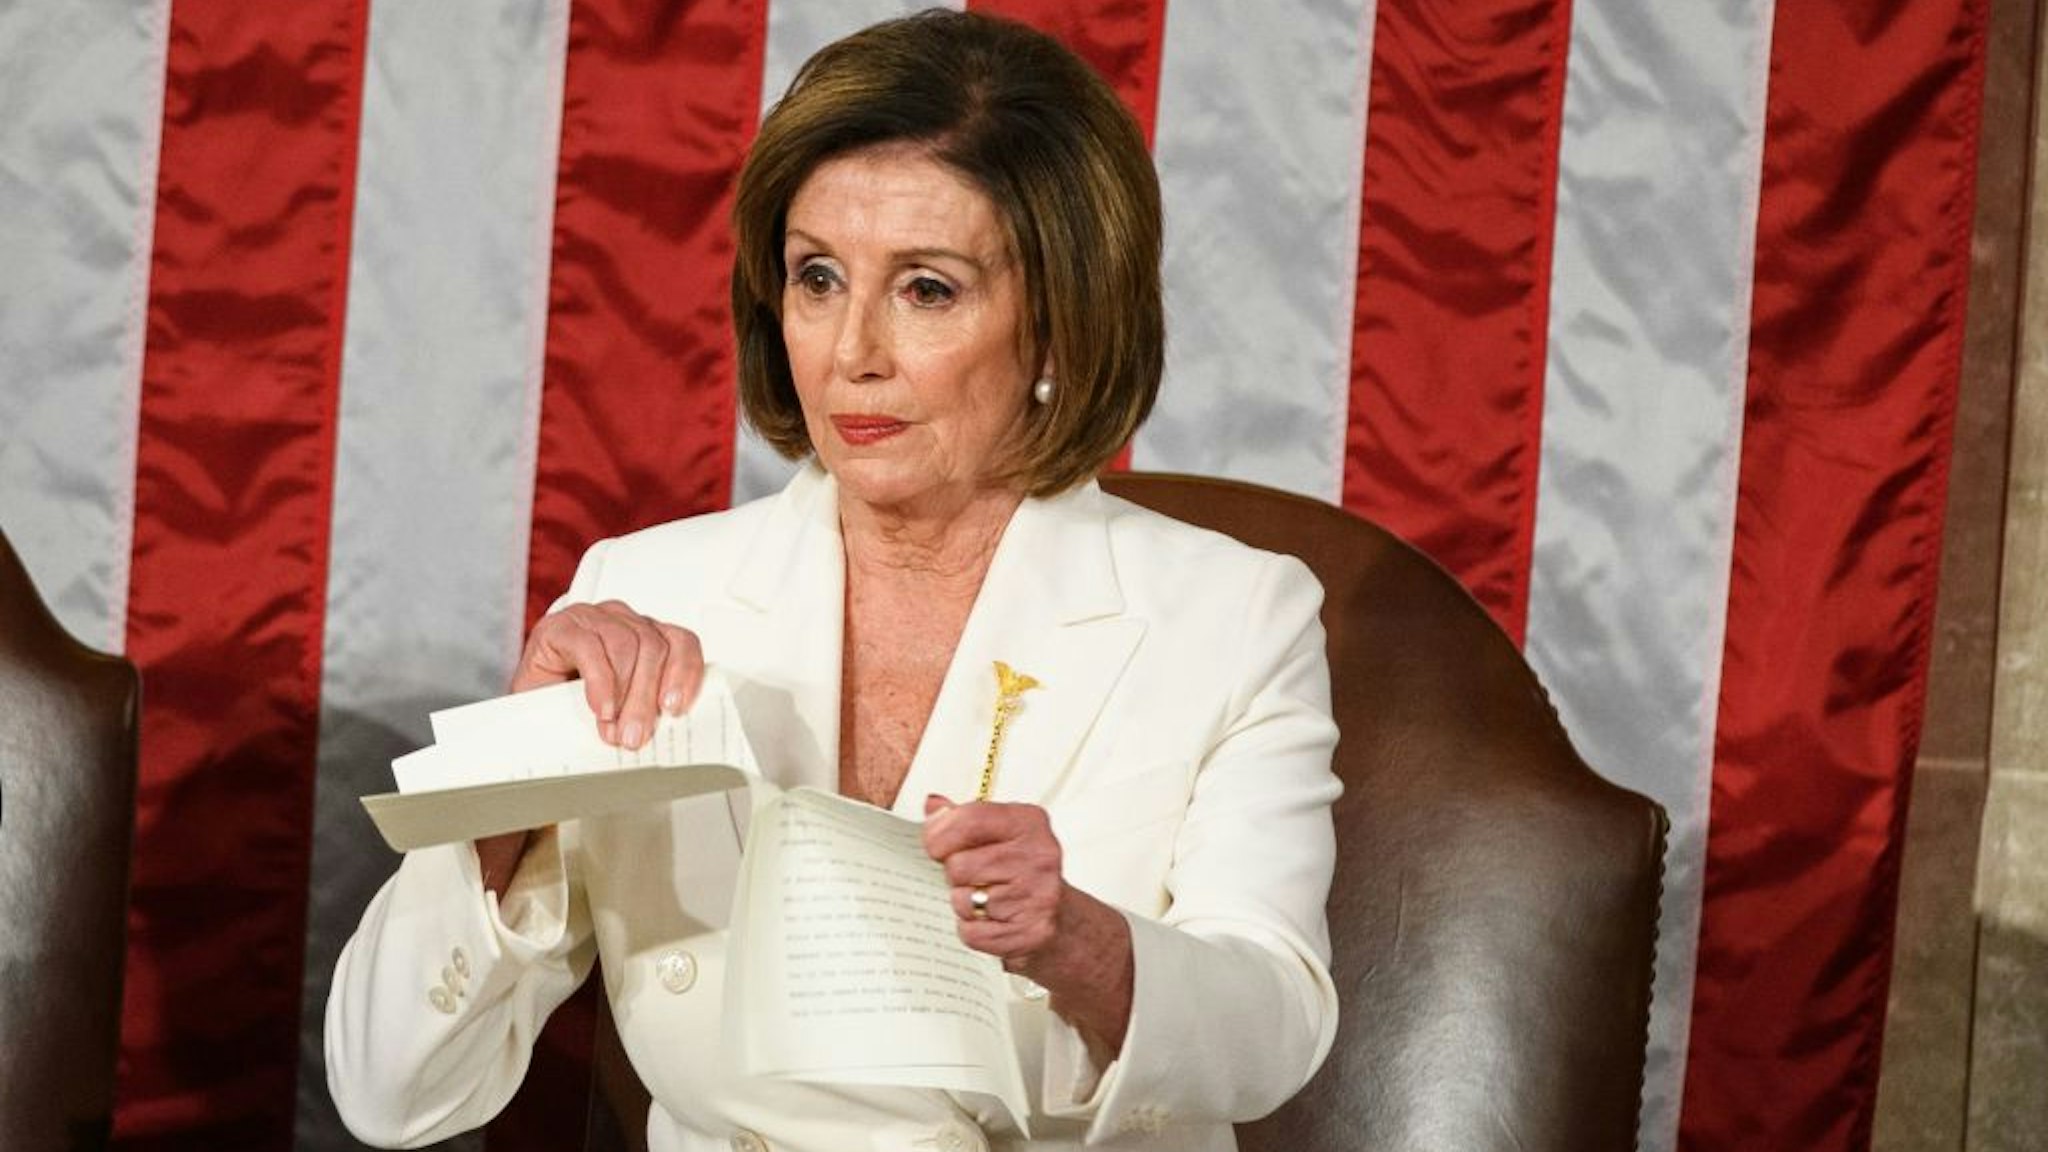 Speaker of the US House of Representatives Nancy Pelosi rips a copy of US President Donald Trumps speech after he delivers the State of the Union address at the US Capitol in Washington, DC, on February 4, 2020.